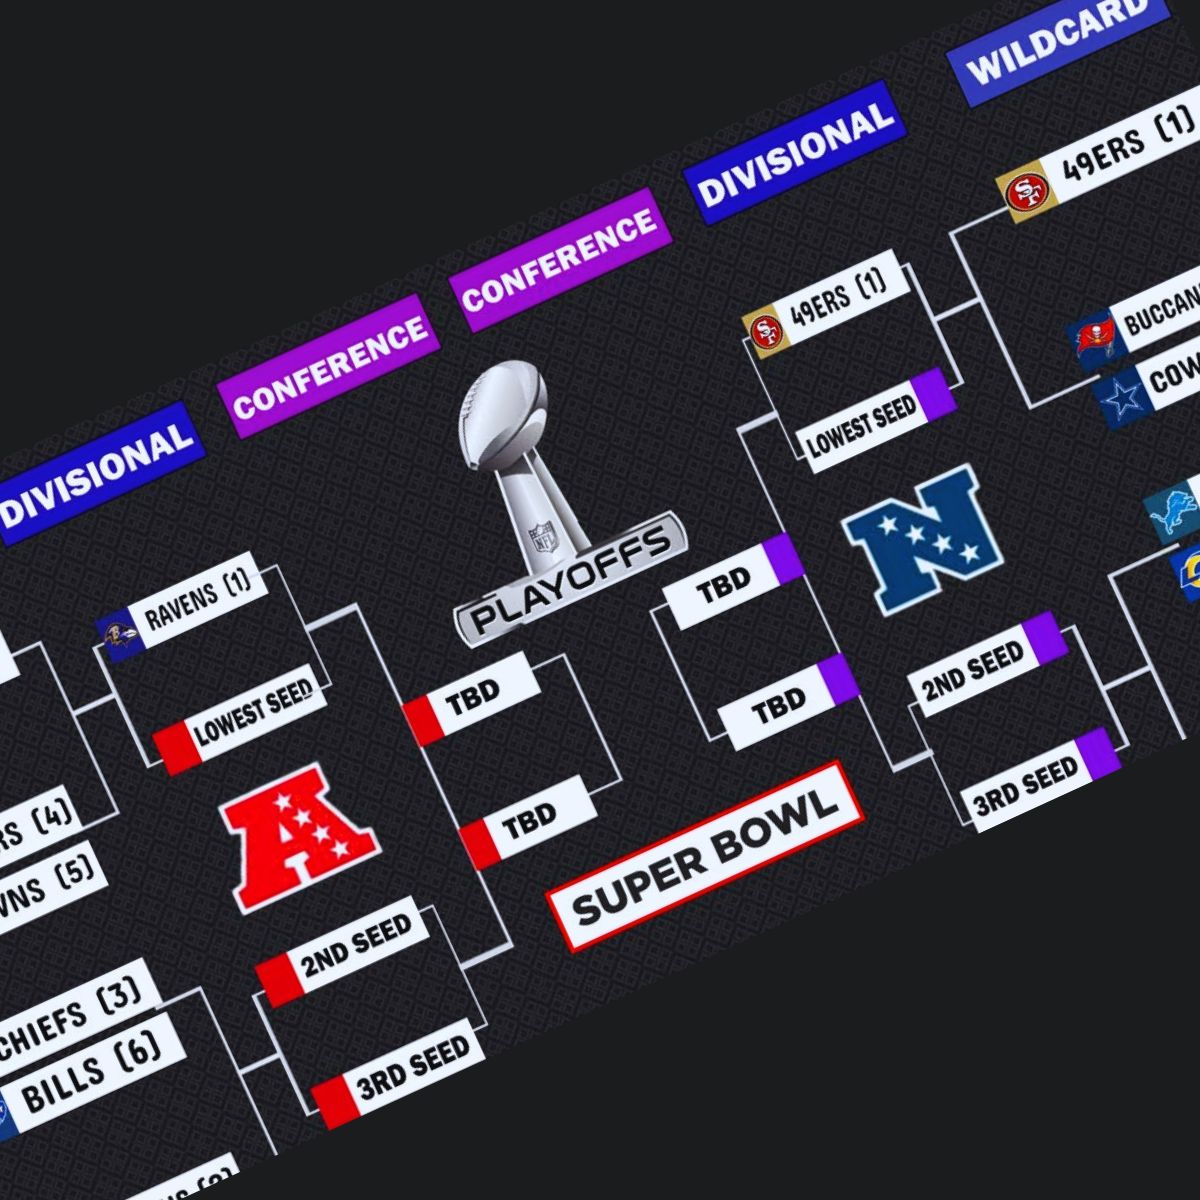 Where NFL Playoff Brackets are available